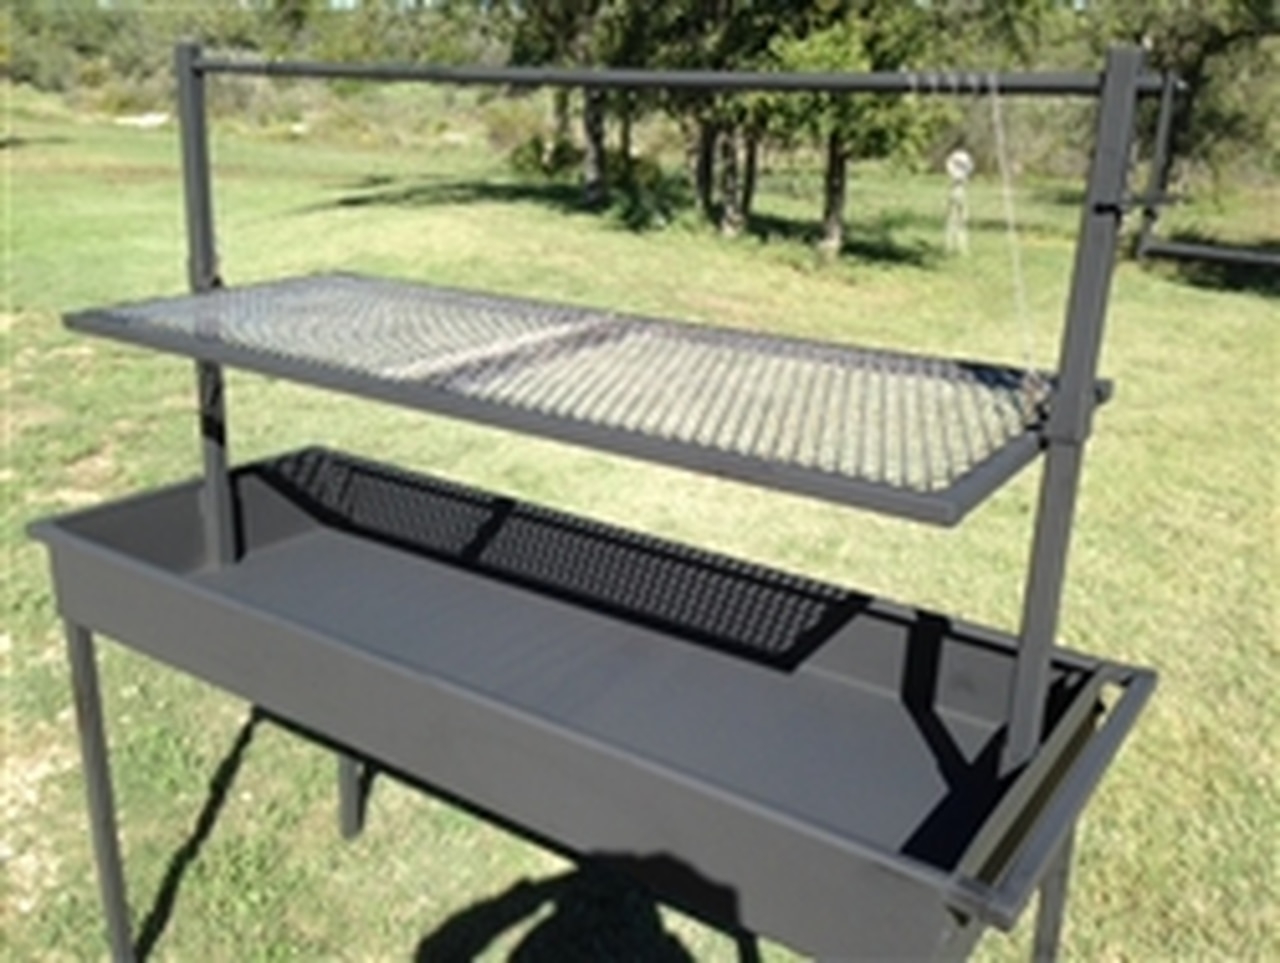 Large charcoal barbecue grills